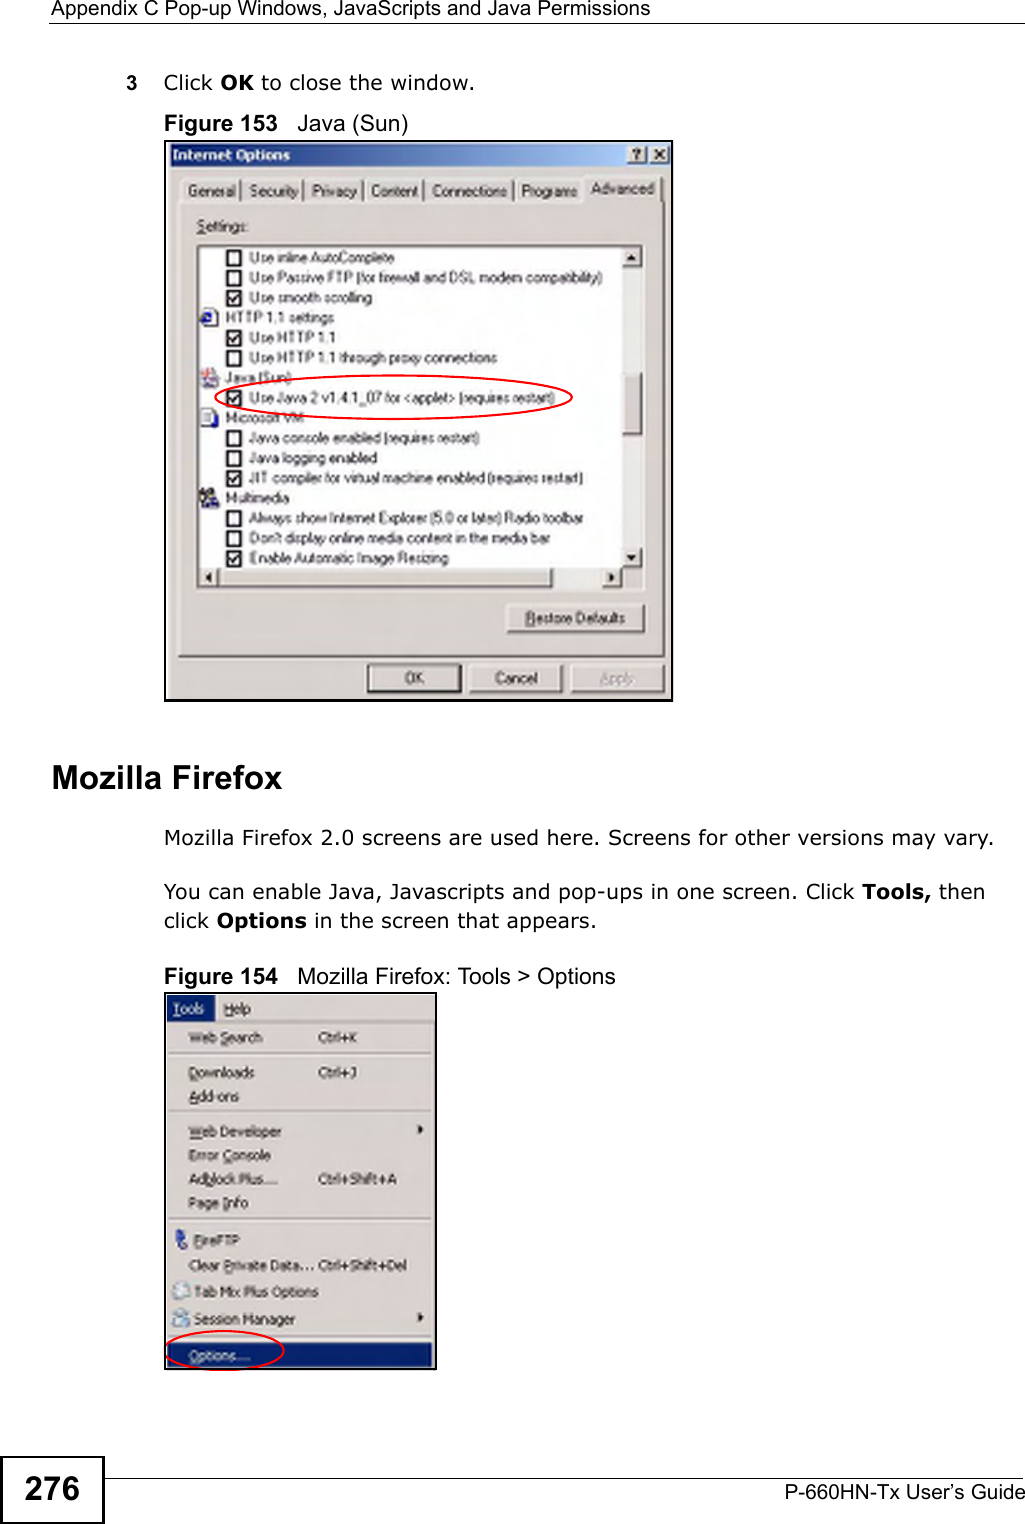 Appendix C Pop-up Windows, JavaScripts and Java PermissionsP-660HN-Tx User’s Guide2763Click OK to close the window.Figure 153   Java (Sun)Mozilla FirefoxMozilla Firefox 2.0 screens are used here. Screens for other versions may vary. You can enable Java, Javascripts and pop-ups in one screen. Click Tools, then click Options in the screen that appears.Figure 154   Mozilla Firefox: Tools &gt; Options